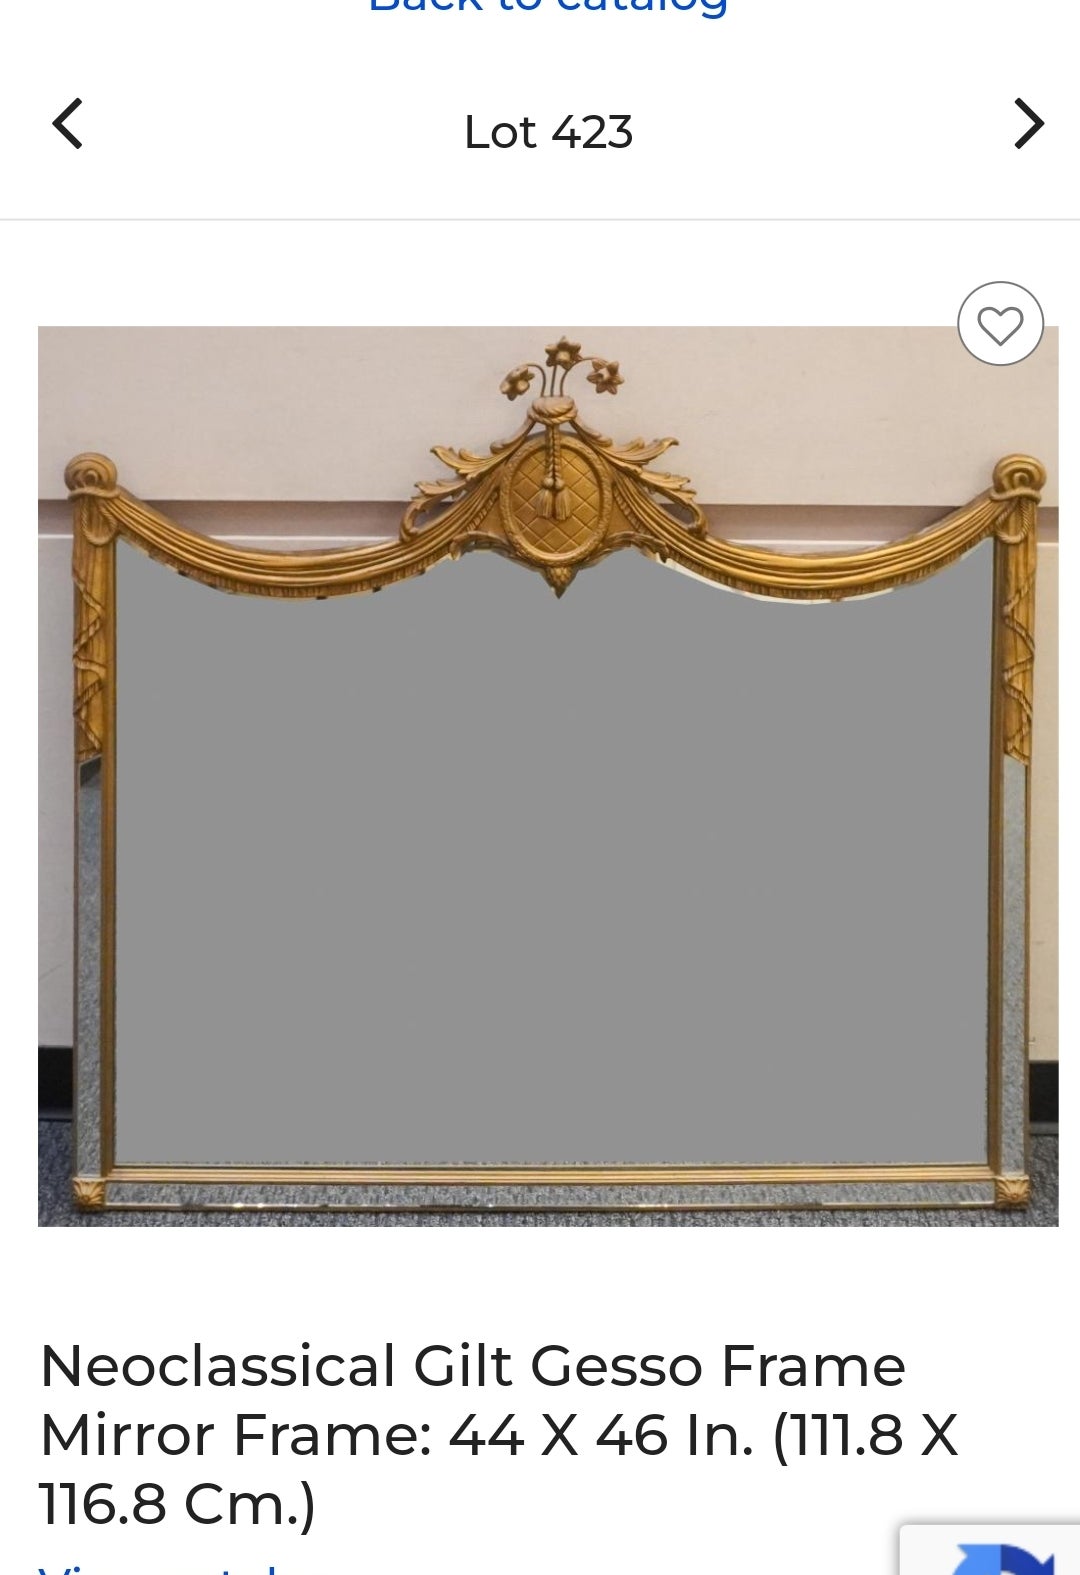 A Neoclassical Swag Gilt Gesso Mirrored Frame Wall Mirror. Heavy frame with wood backing. Measures 46